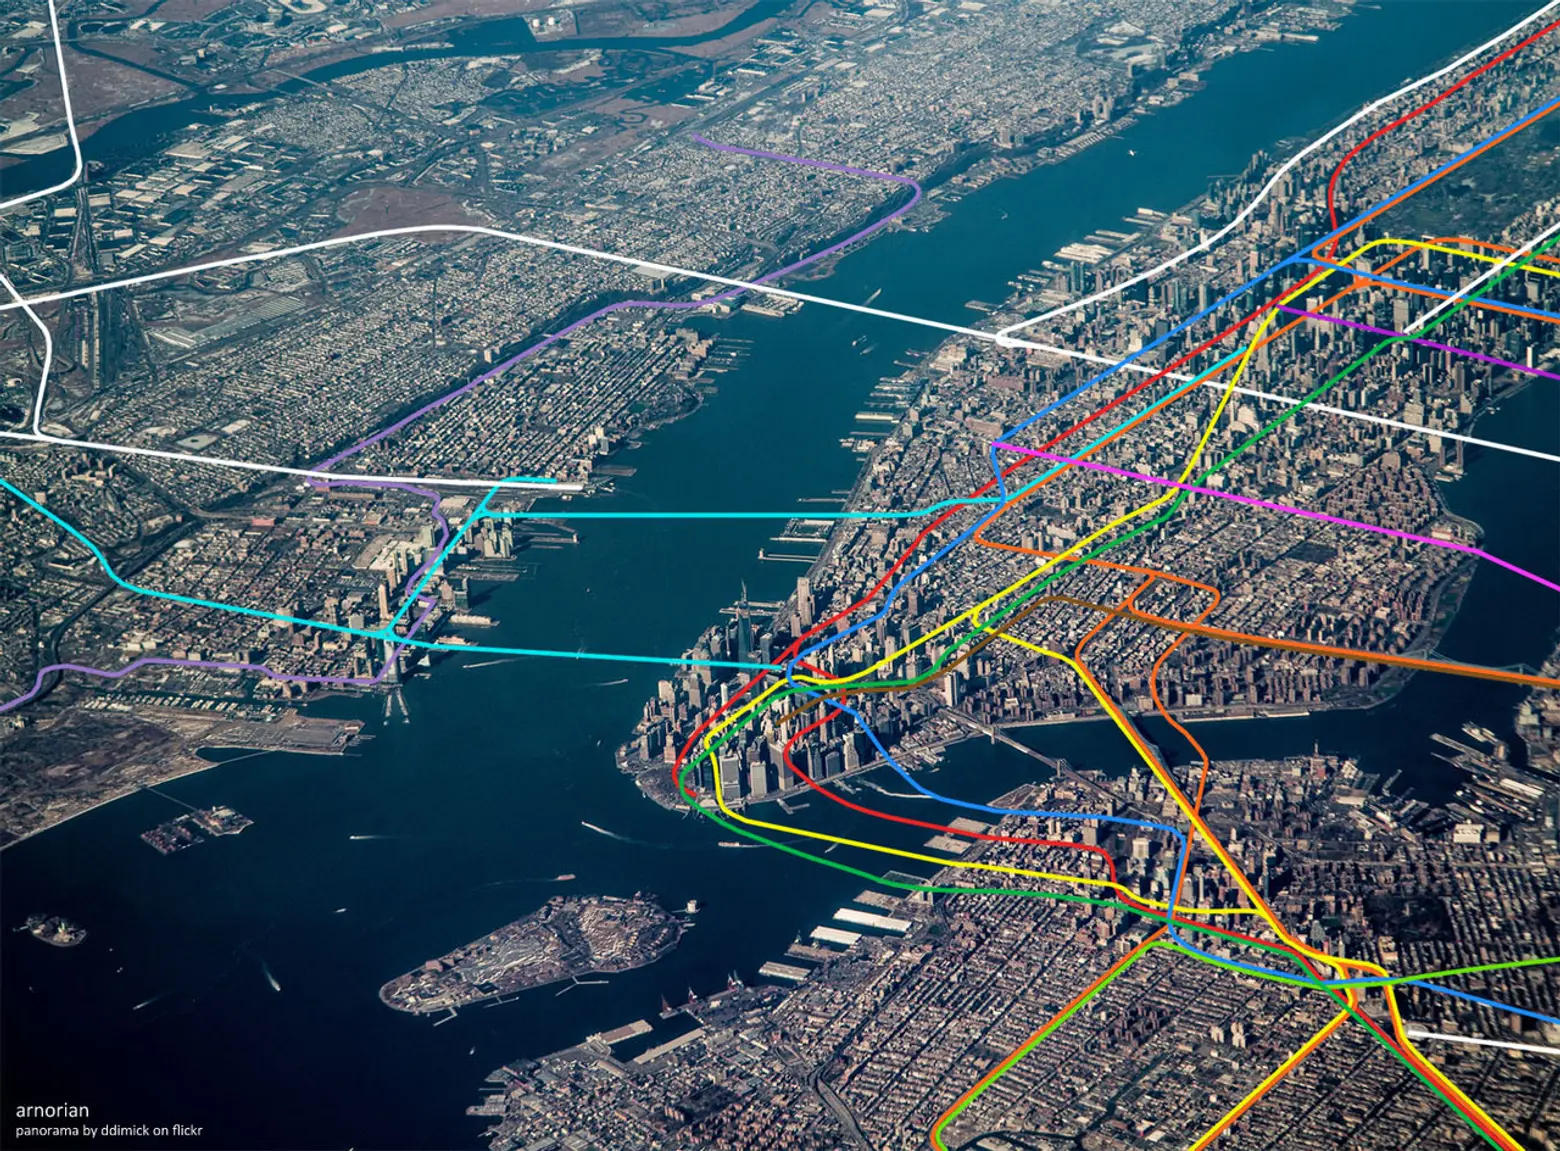 nyc subway system map overlaid over manhattan aerial image 2